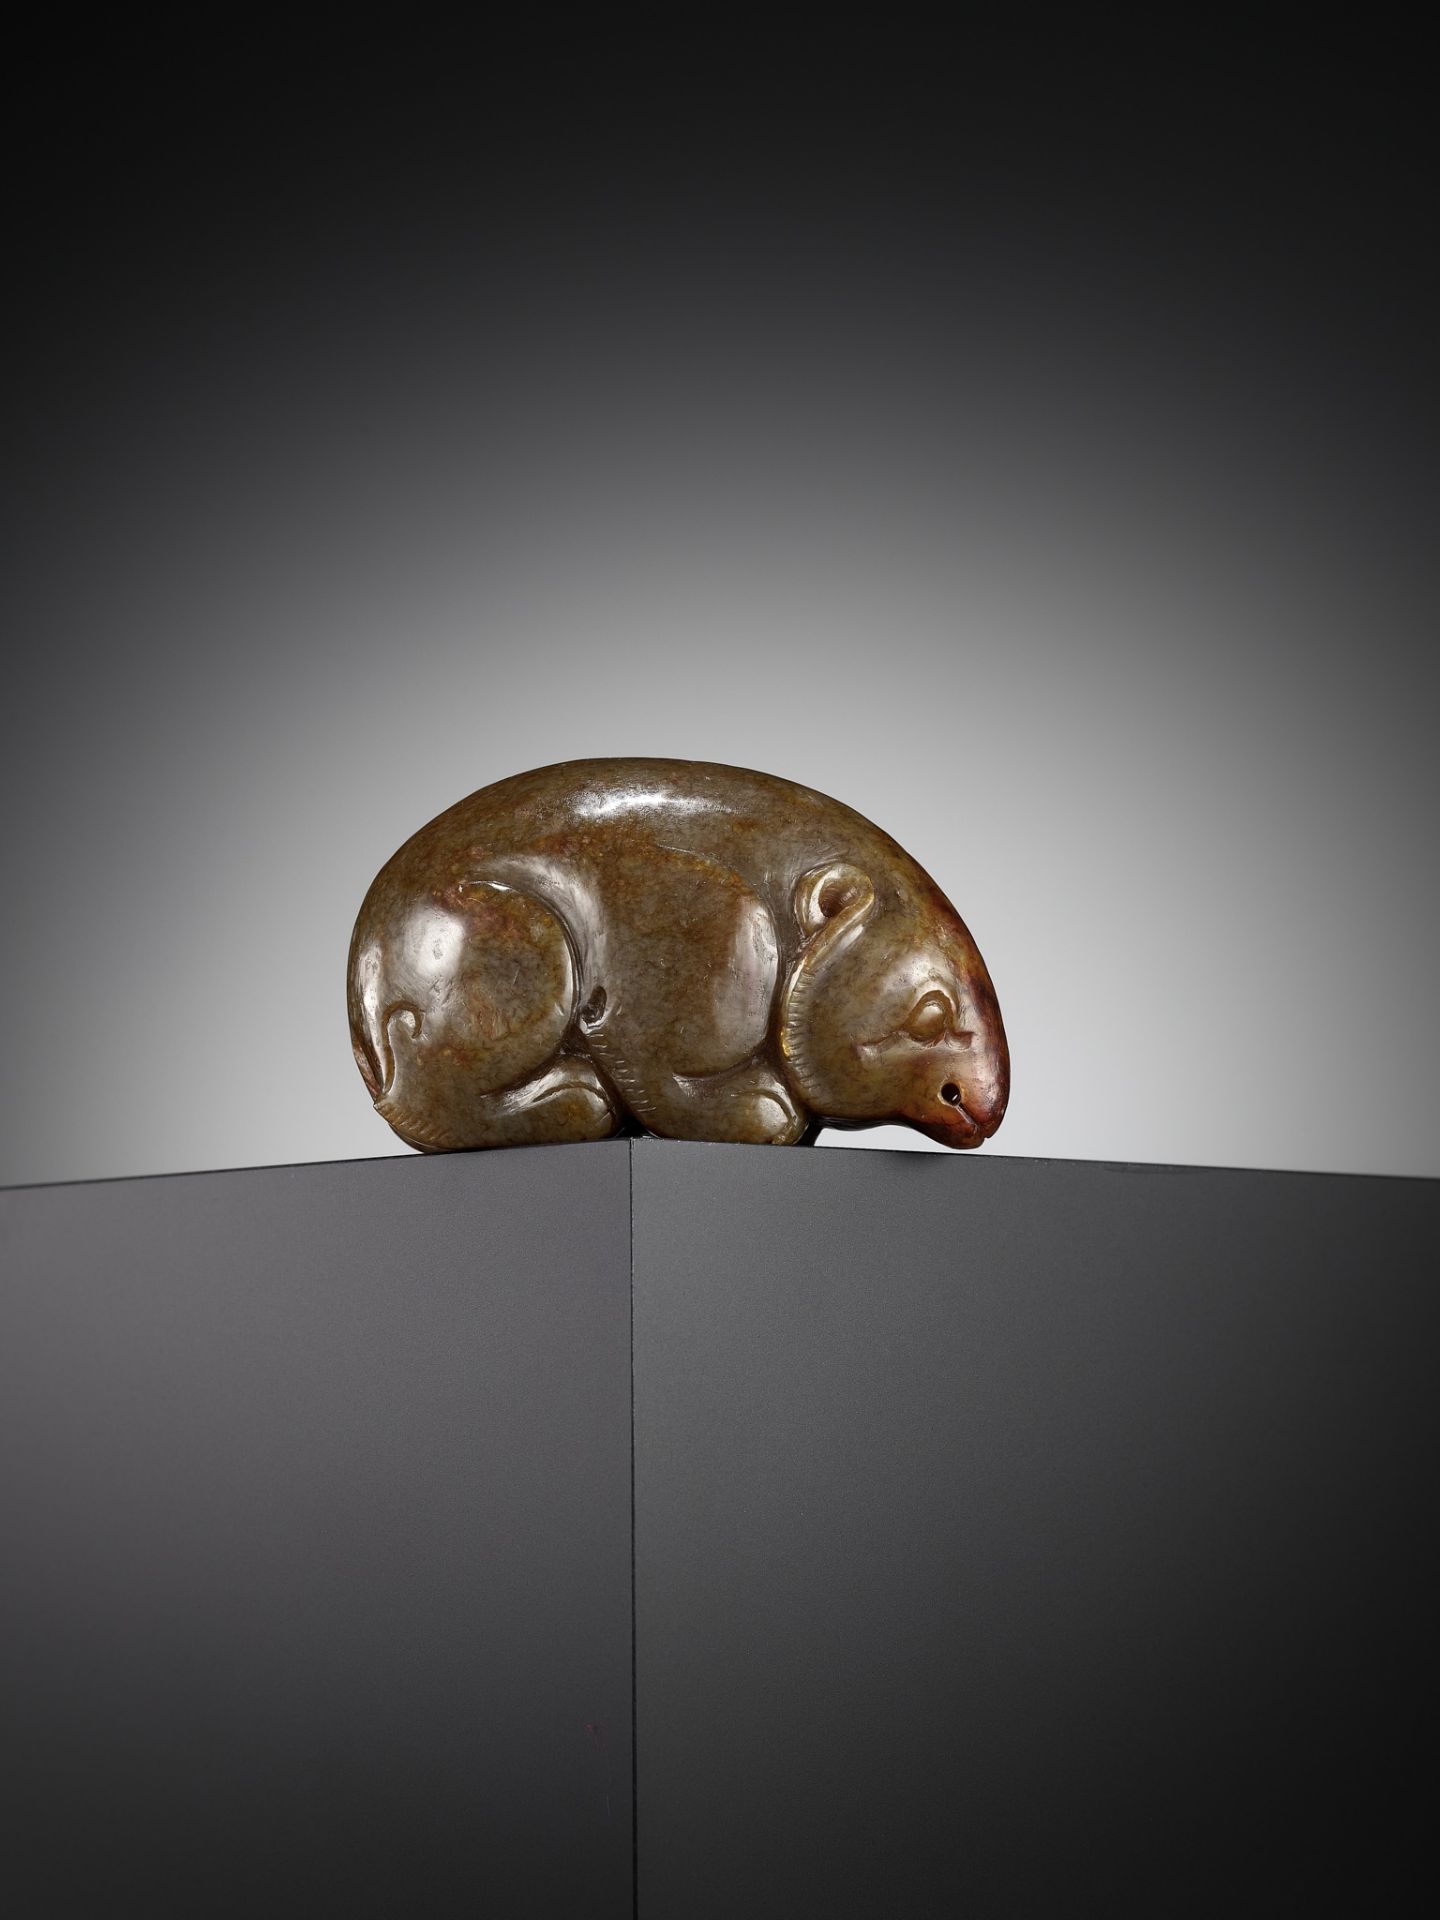 A DEEP CELADON AND RUSSET JADE 'CROUCHING BEAR' PENDANT, SONG TO MING DYNASTY - Image 8 of 10